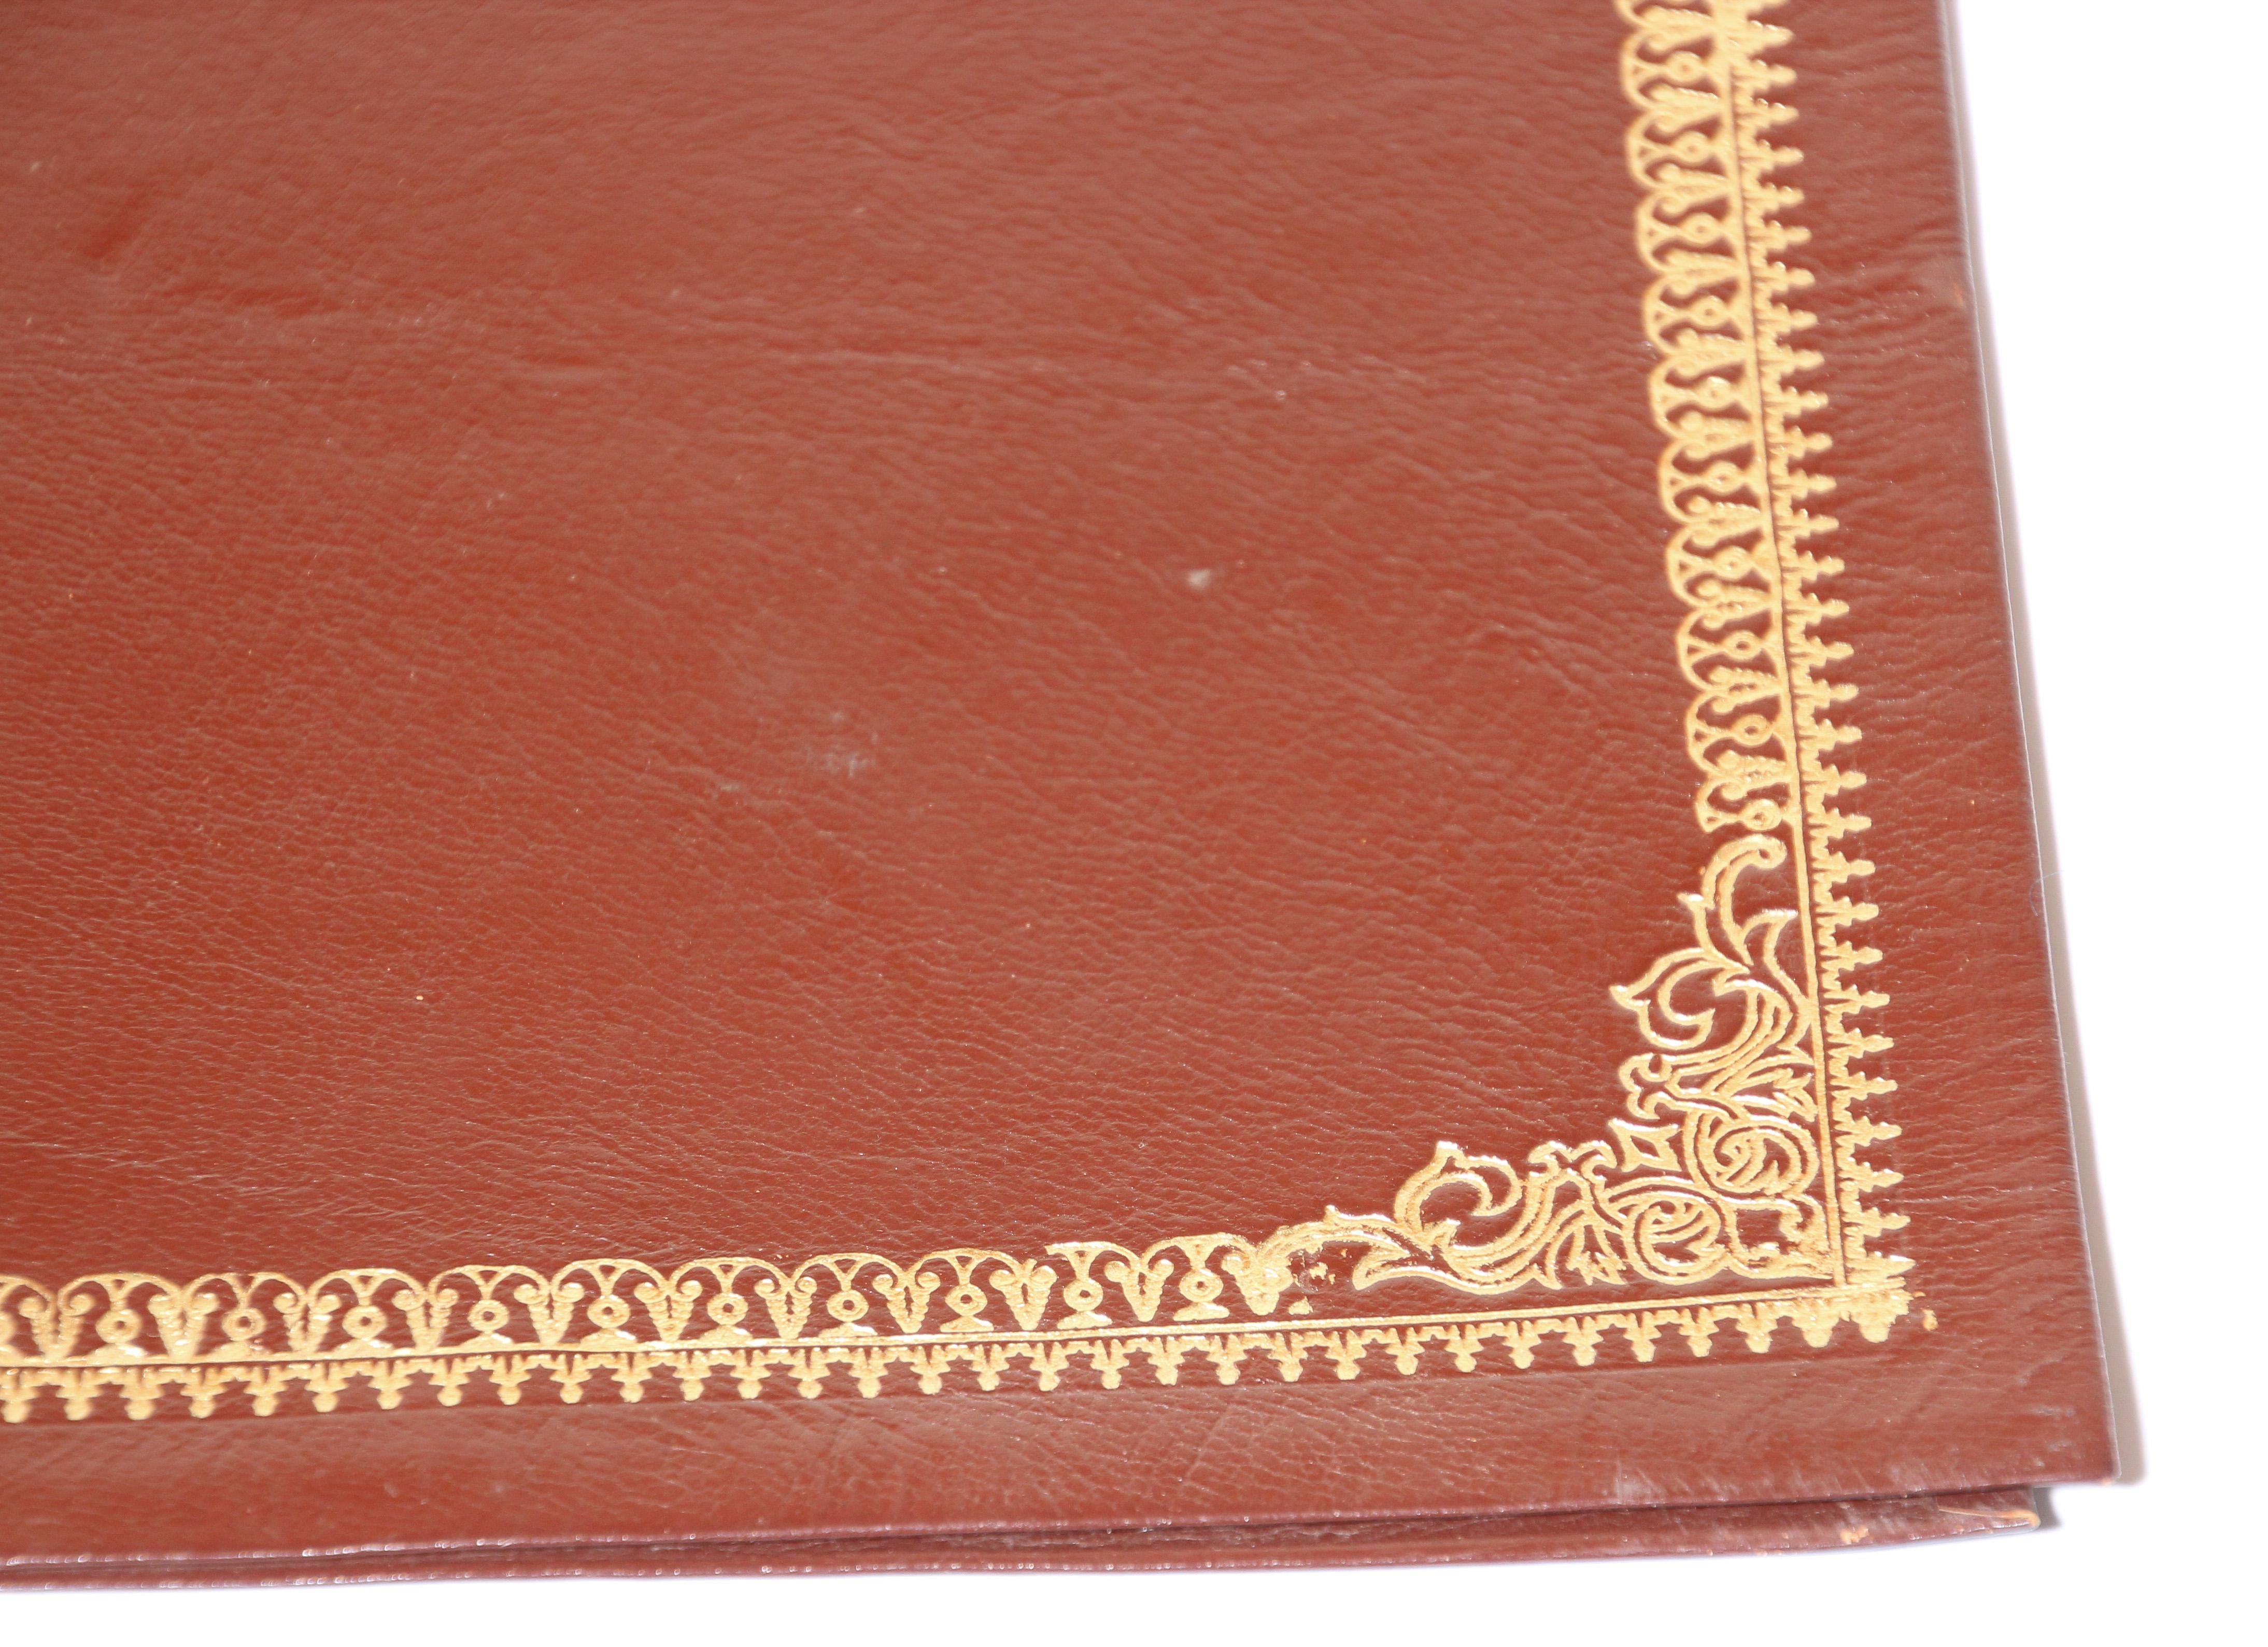 Late 20th Century Vintage Moroccan Hand Tooled Leather Brown Portfolio